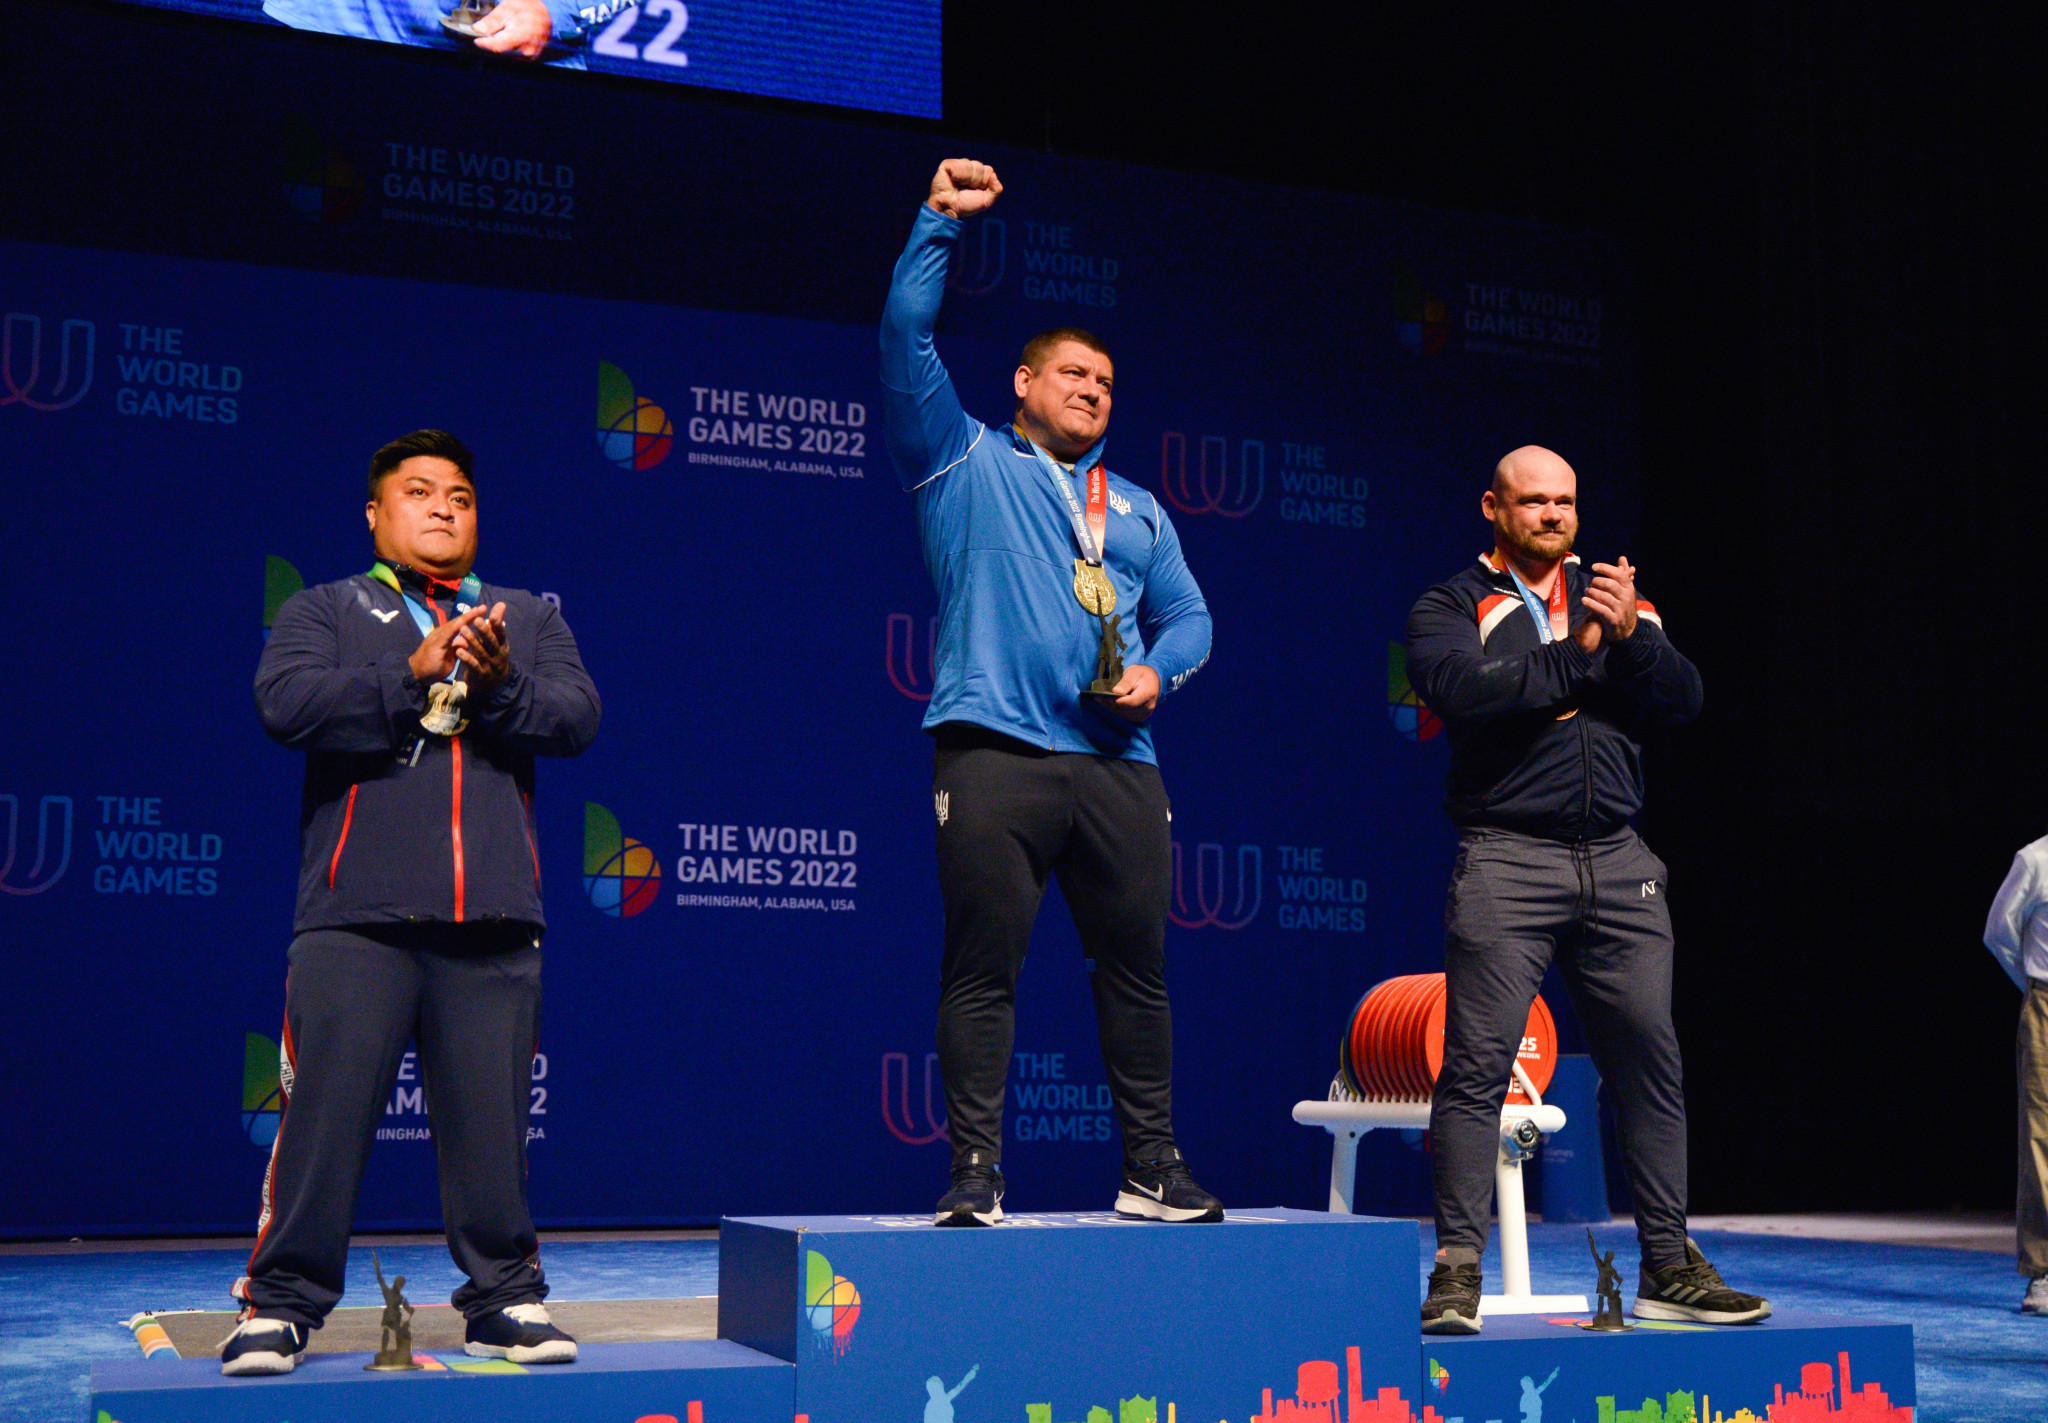 A total of 223 medal events were held at the Birmingham 2022 World Games ©The World Games